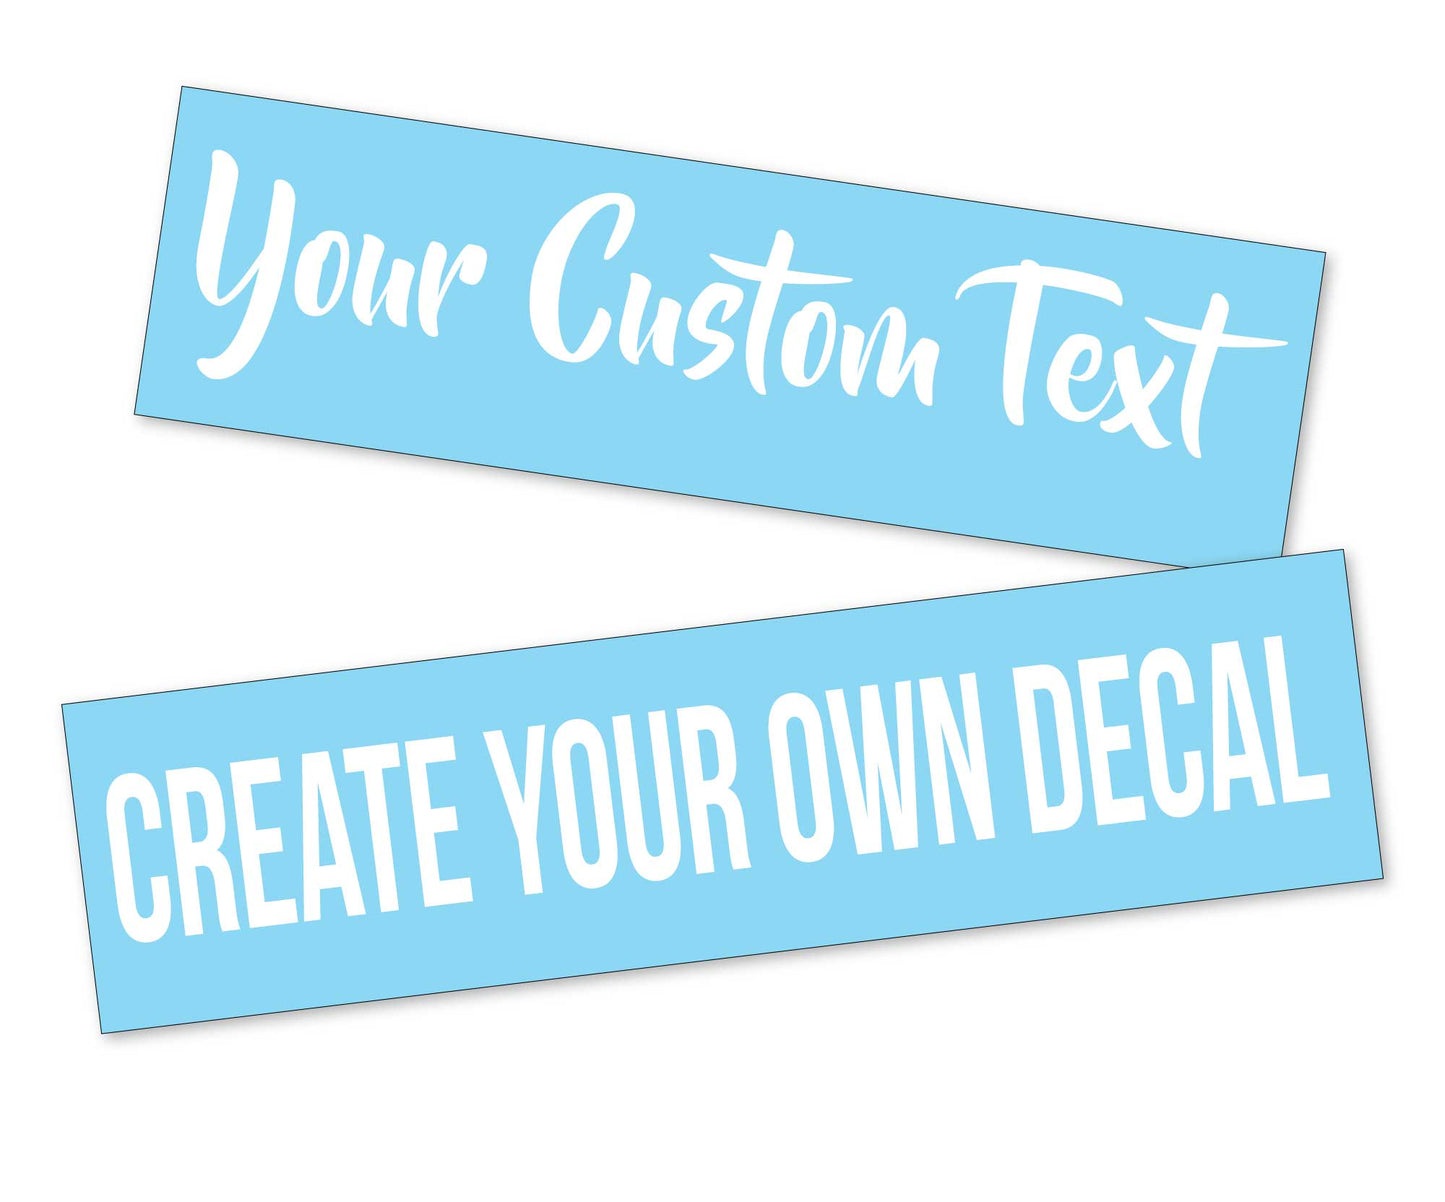 Custom Text Decal for Cups, Phones, Cars, Windows, Laptops, Vehicles, Boats, RV, etc.